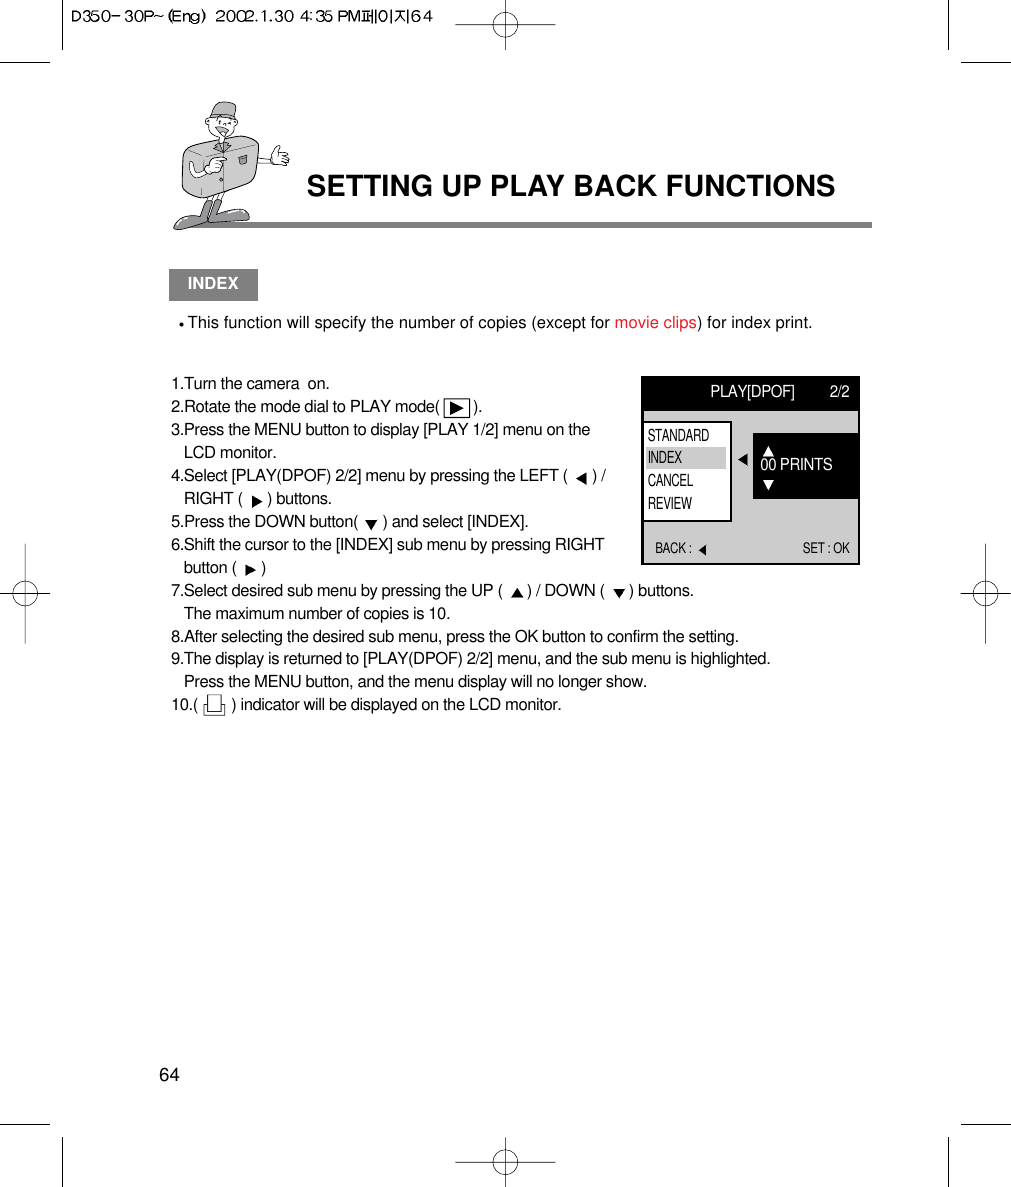 SETTING UP PLAY BACK FUNCTIONS64INDEXThis function will specify the number of copies (except for movie clips) for index print.1.Turn the camera  on.2.Rotate the mode dial to PLAY mode(        ).3.Press the MENU button to display [PLAY 1/2] menu on theLCD monitor.4.Select [PLAY(DPOF) 2/2] menu by pressing the LEFT (  ) /RIGHT (  ) buttons.5.Press the DOWN button(  ) and select [INDEX].6.Shift the cursor to the [INDEX] sub menu by pressing RIGHTbutton (  ) 7.Select desired sub menu by pressing the UP (  ) / DOWN (  ) buttons.The maximum number of copies is 10.8.After selecting the desired sub menu, press the OK button to confirm the setting.9.The display is returned to [PLAY(DPOF) 2/2] menu, and the sub menu is highlighted. Press the MENU button, and the menu display will no longer show.10.(        ) indicator will be displayed on the LCD monitor.PLAY[DPOF] 2/2BACK :  SET : OK00 PRINTSSTANDARDINDEXCANCELREVIEW